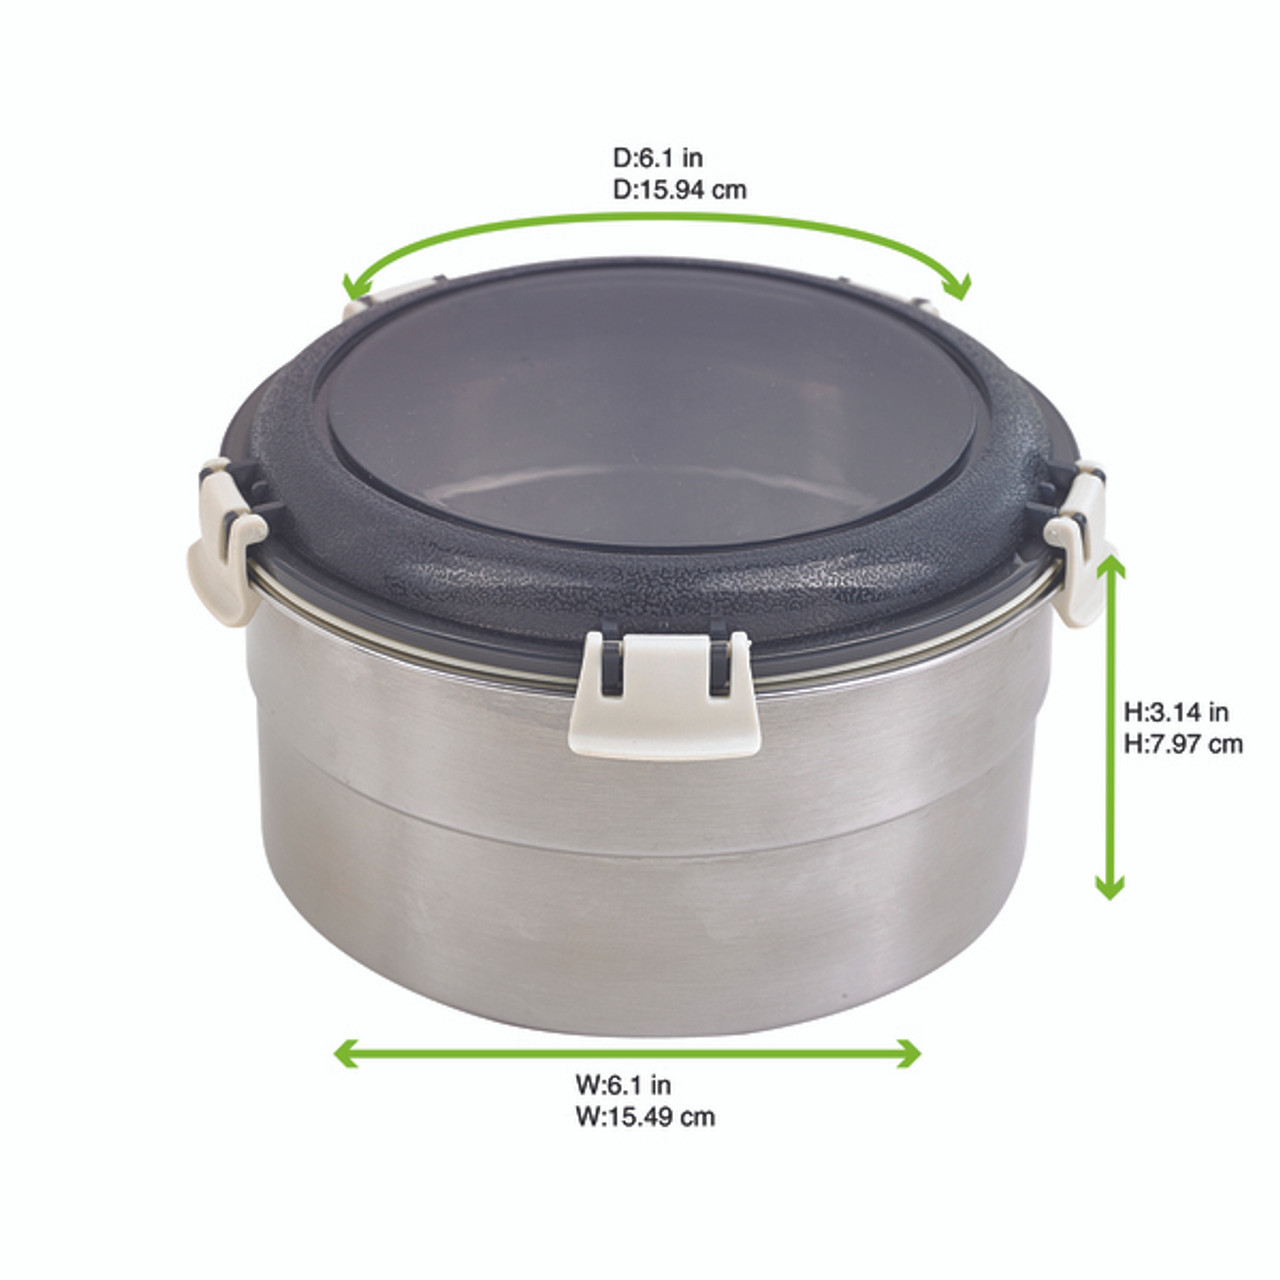 Order a Sample - Noxbox round stainless steel Lunchbox with black PP lid D:6.1in W:6.1in H:3.14in